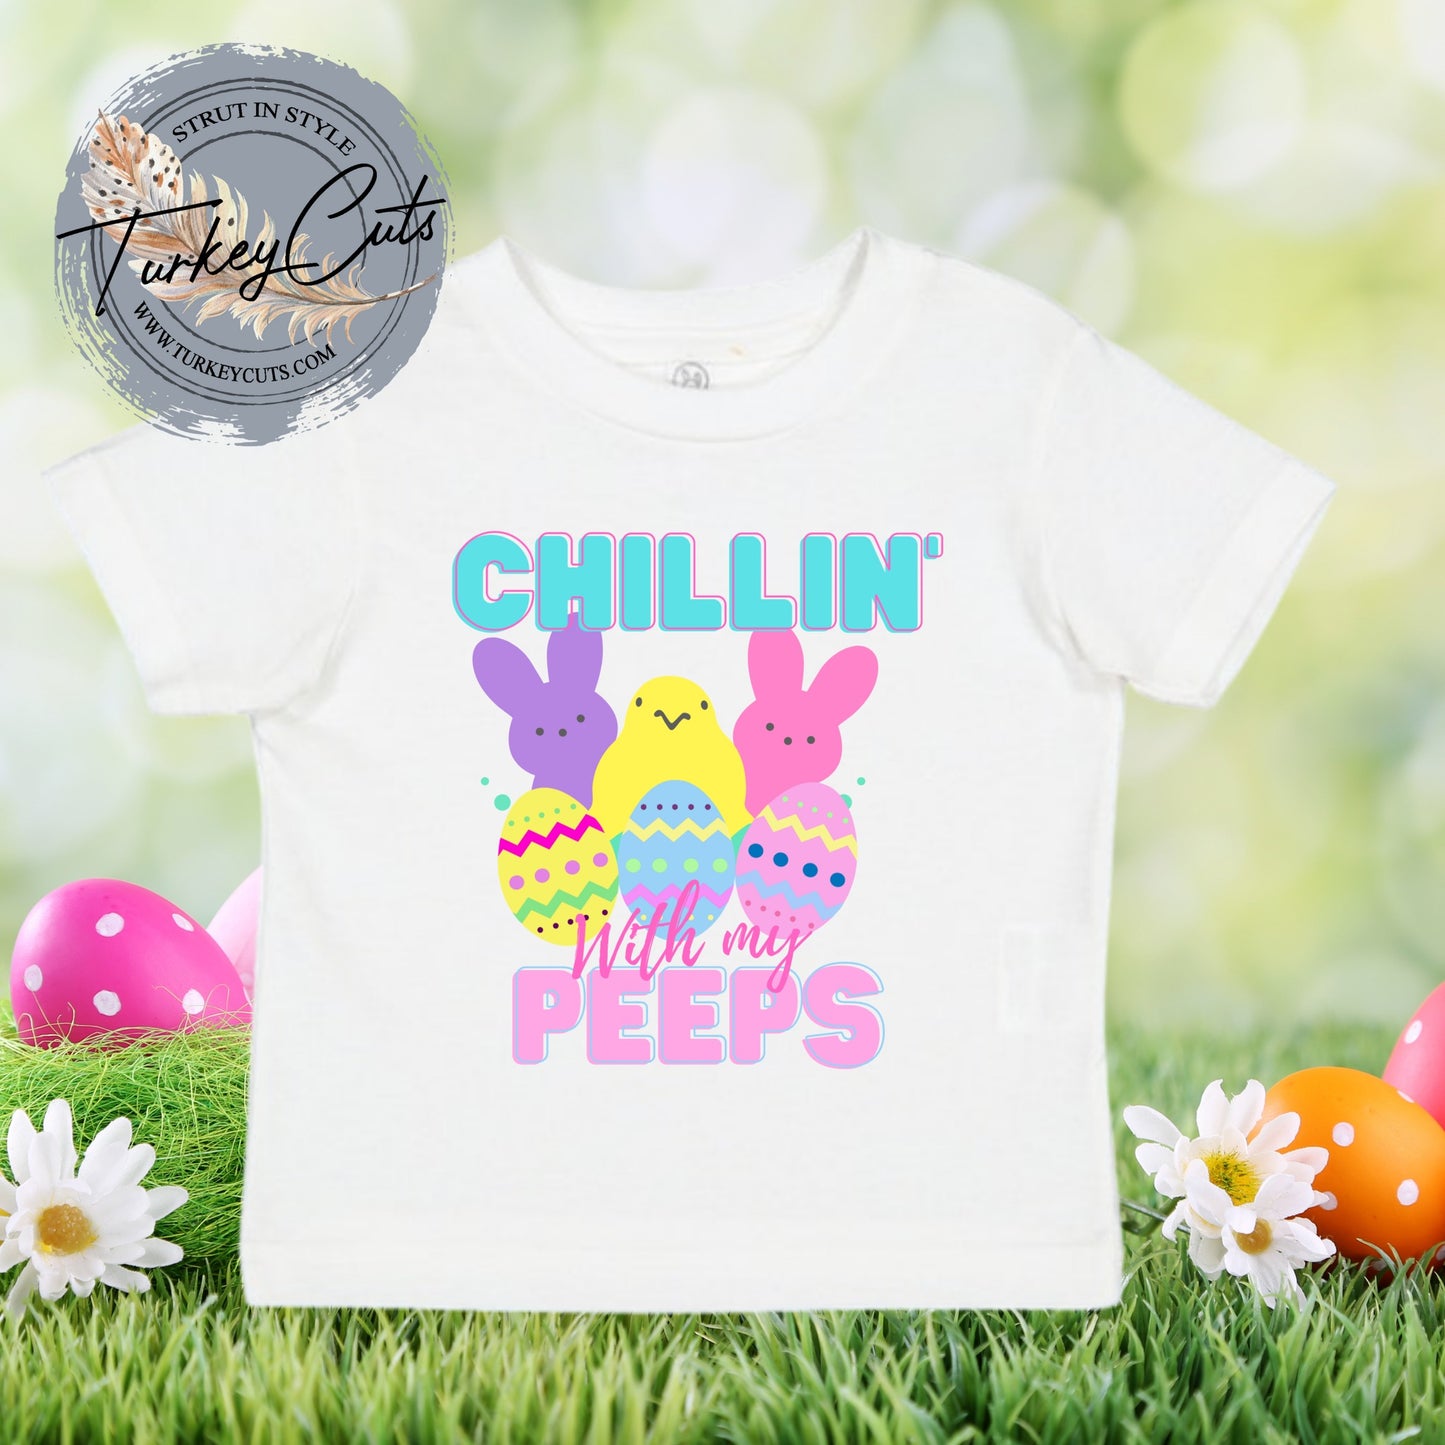 Chillin With My Peeps Tee!